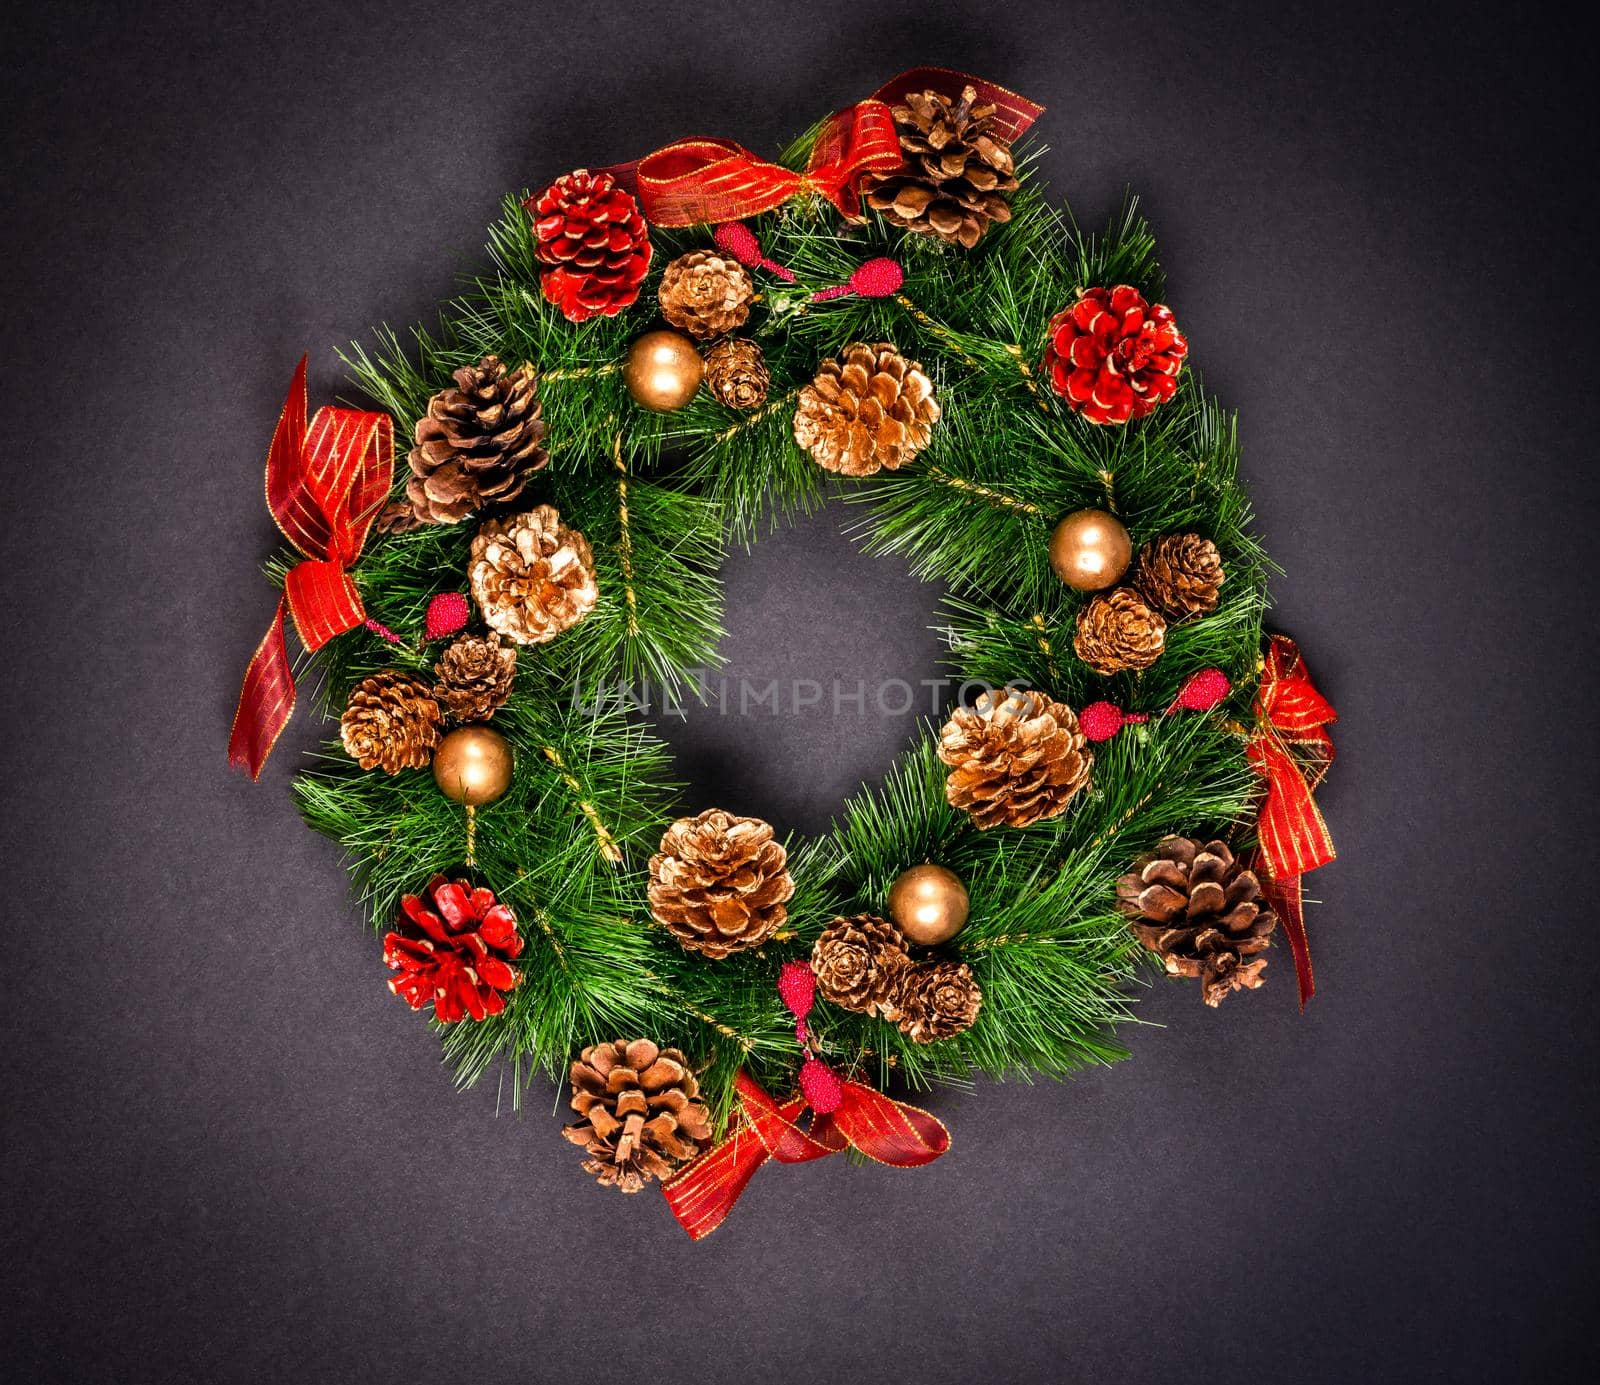 Christmas wreath with pinecones on black background by Mariakray